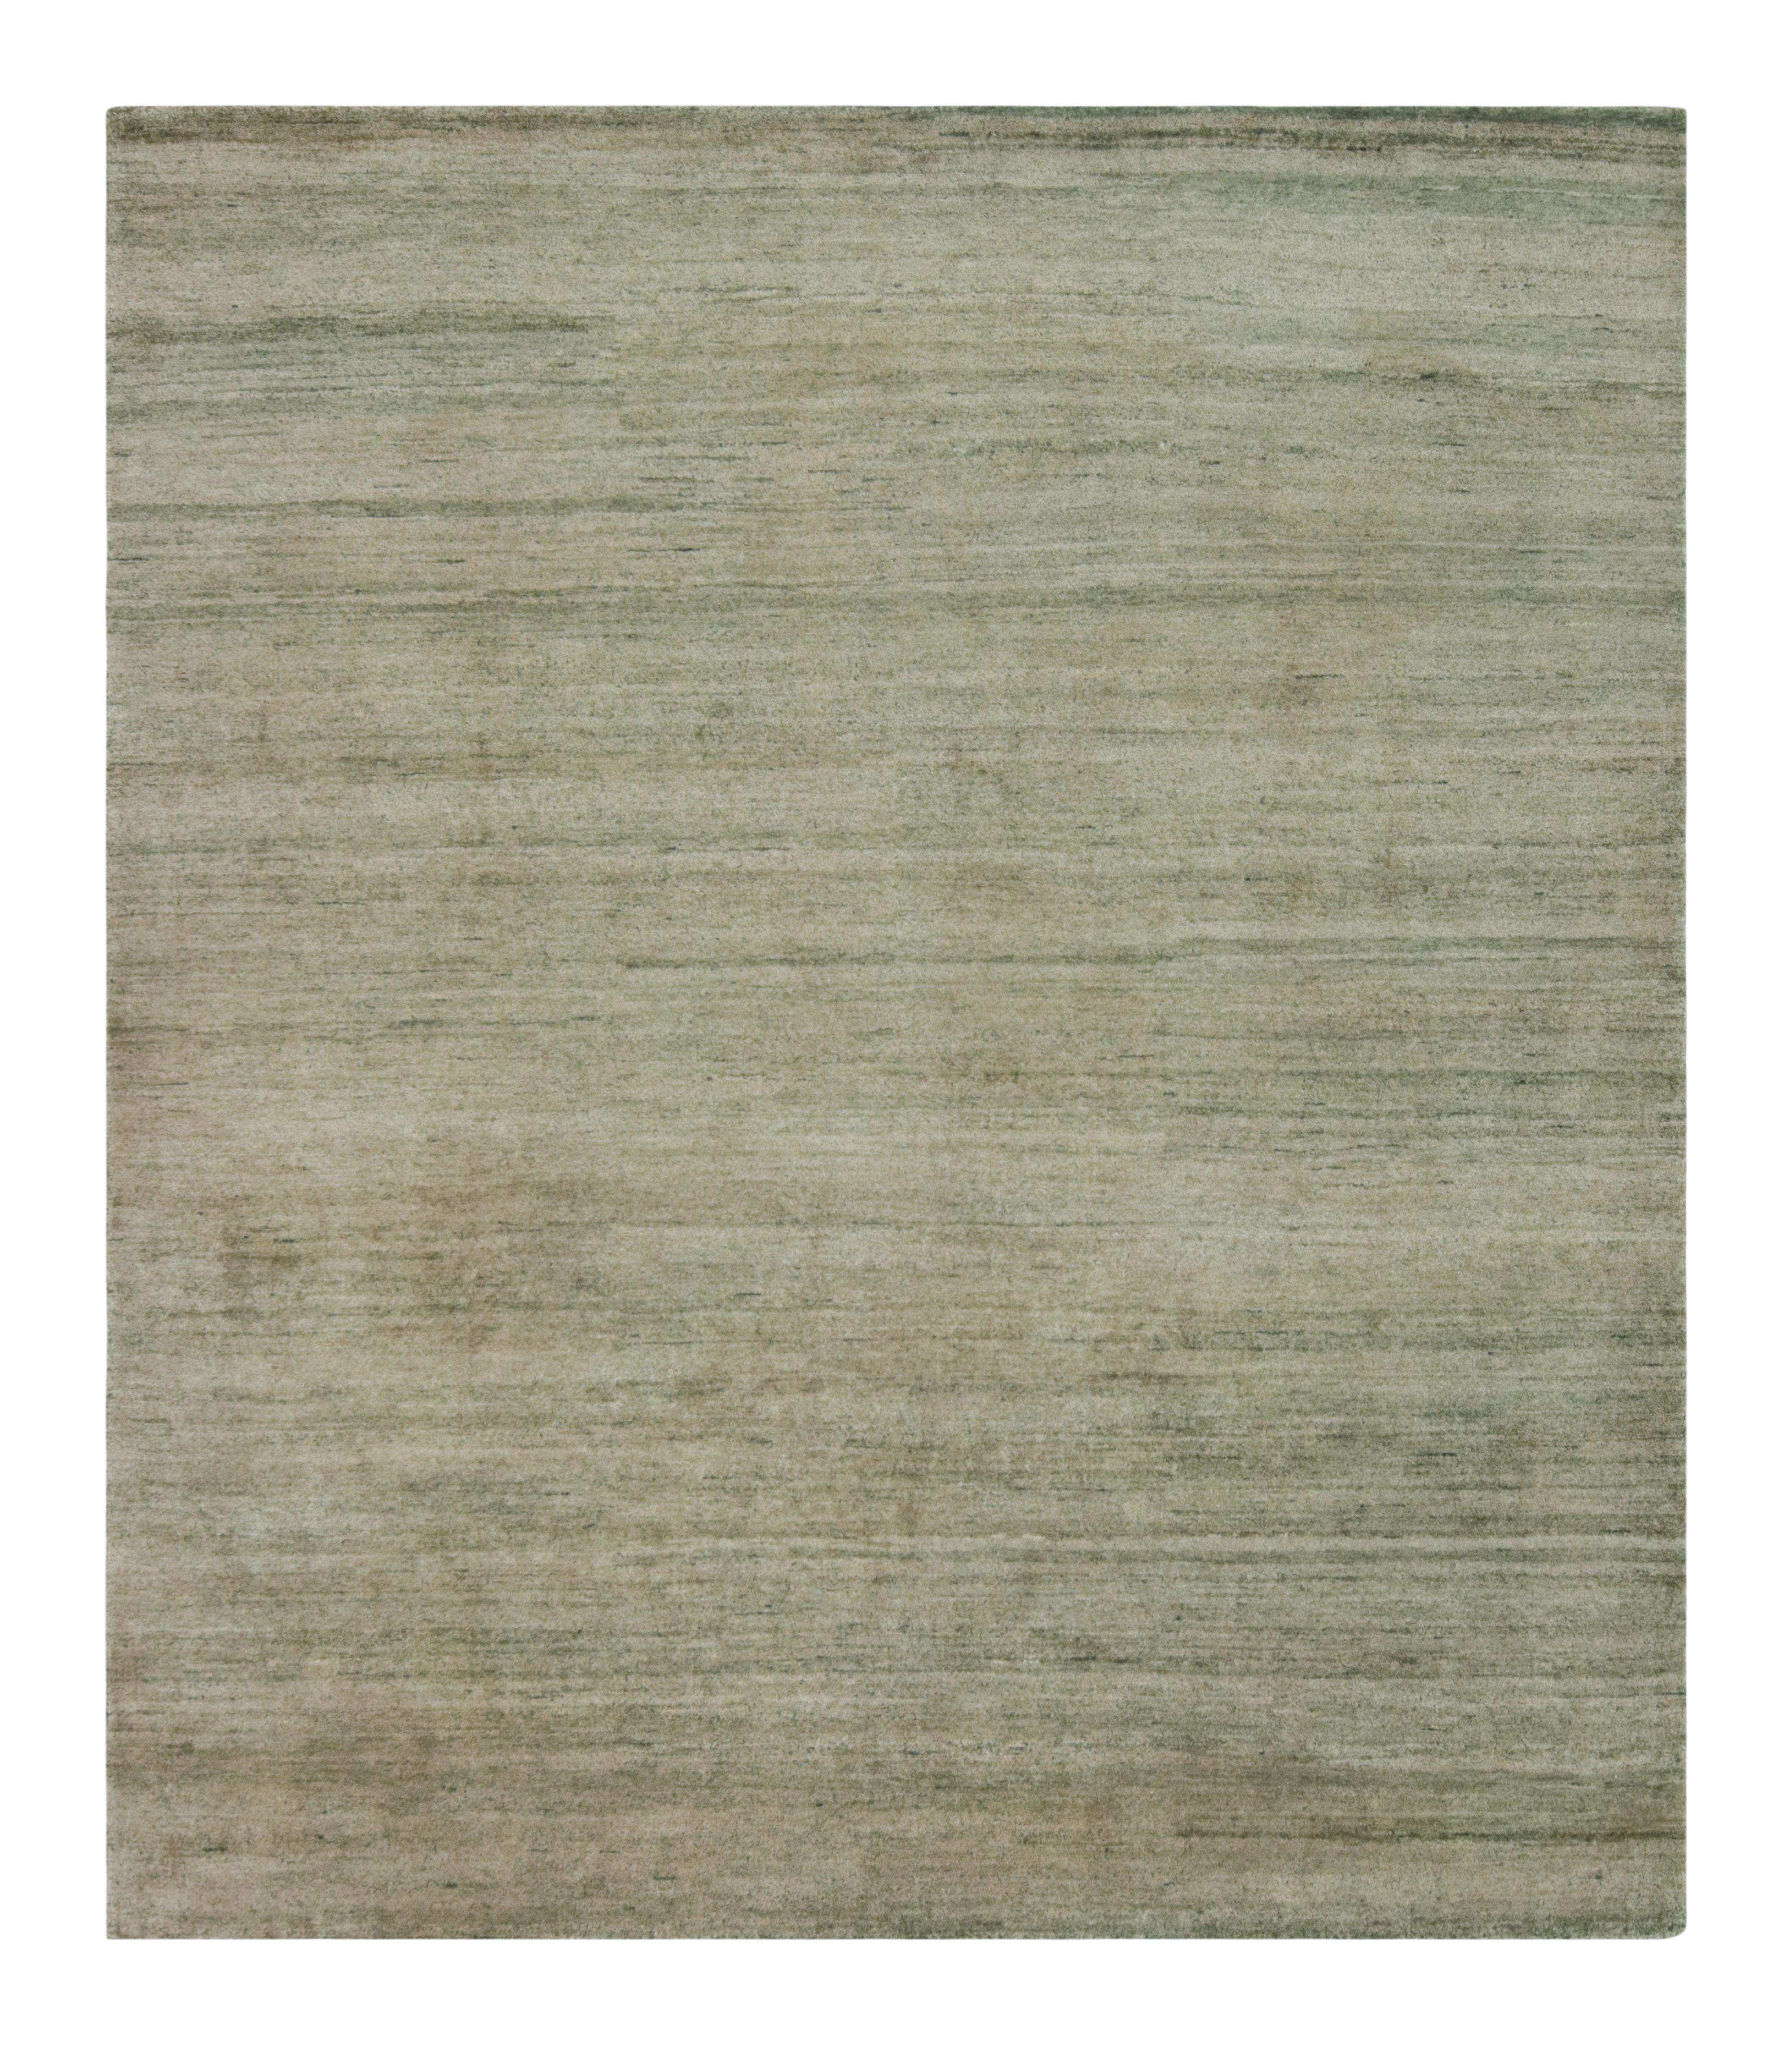 This 8x9 textural rug is a new addition to Rug & Kilim’s Texture of Color collection, hand-knotted in a luxurious all-natural silk. 

On the Design:

This rug reflects our innovation in plain rug styles and comfortable versatility. The natural sheen